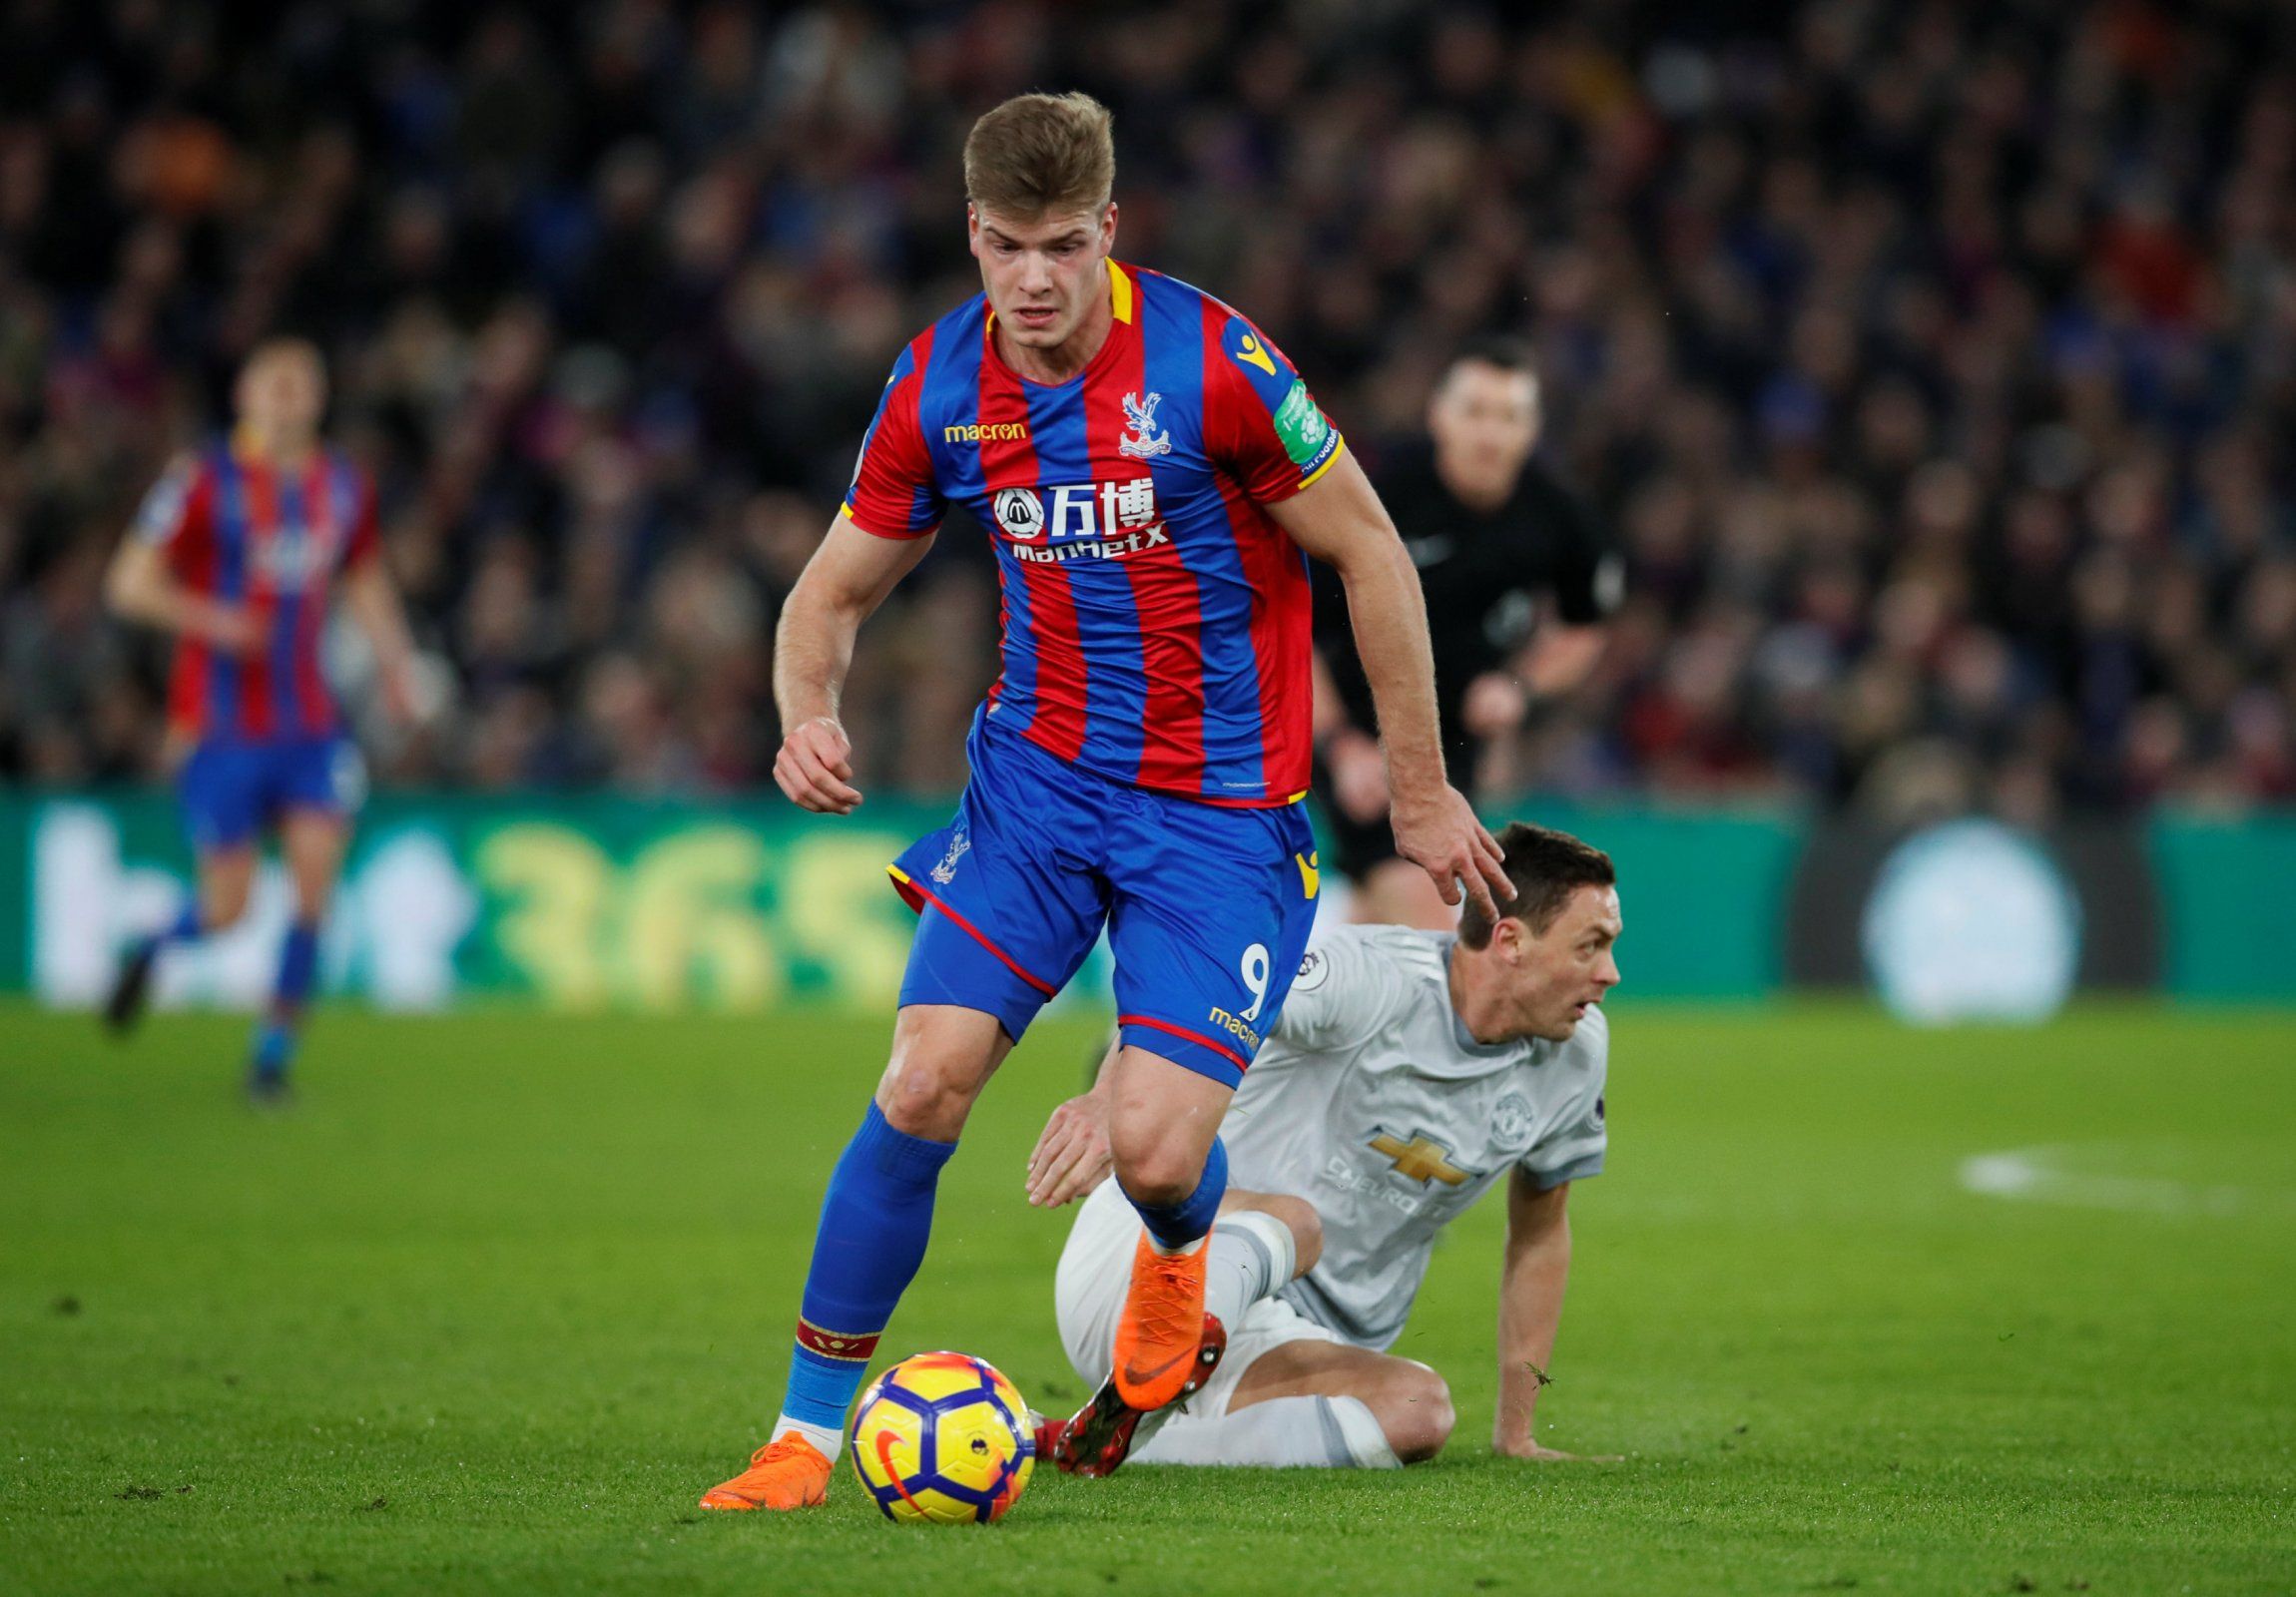 Crystal Palace's Alexander Sorloth dribbles away from Manchester United's Nemanja Matic